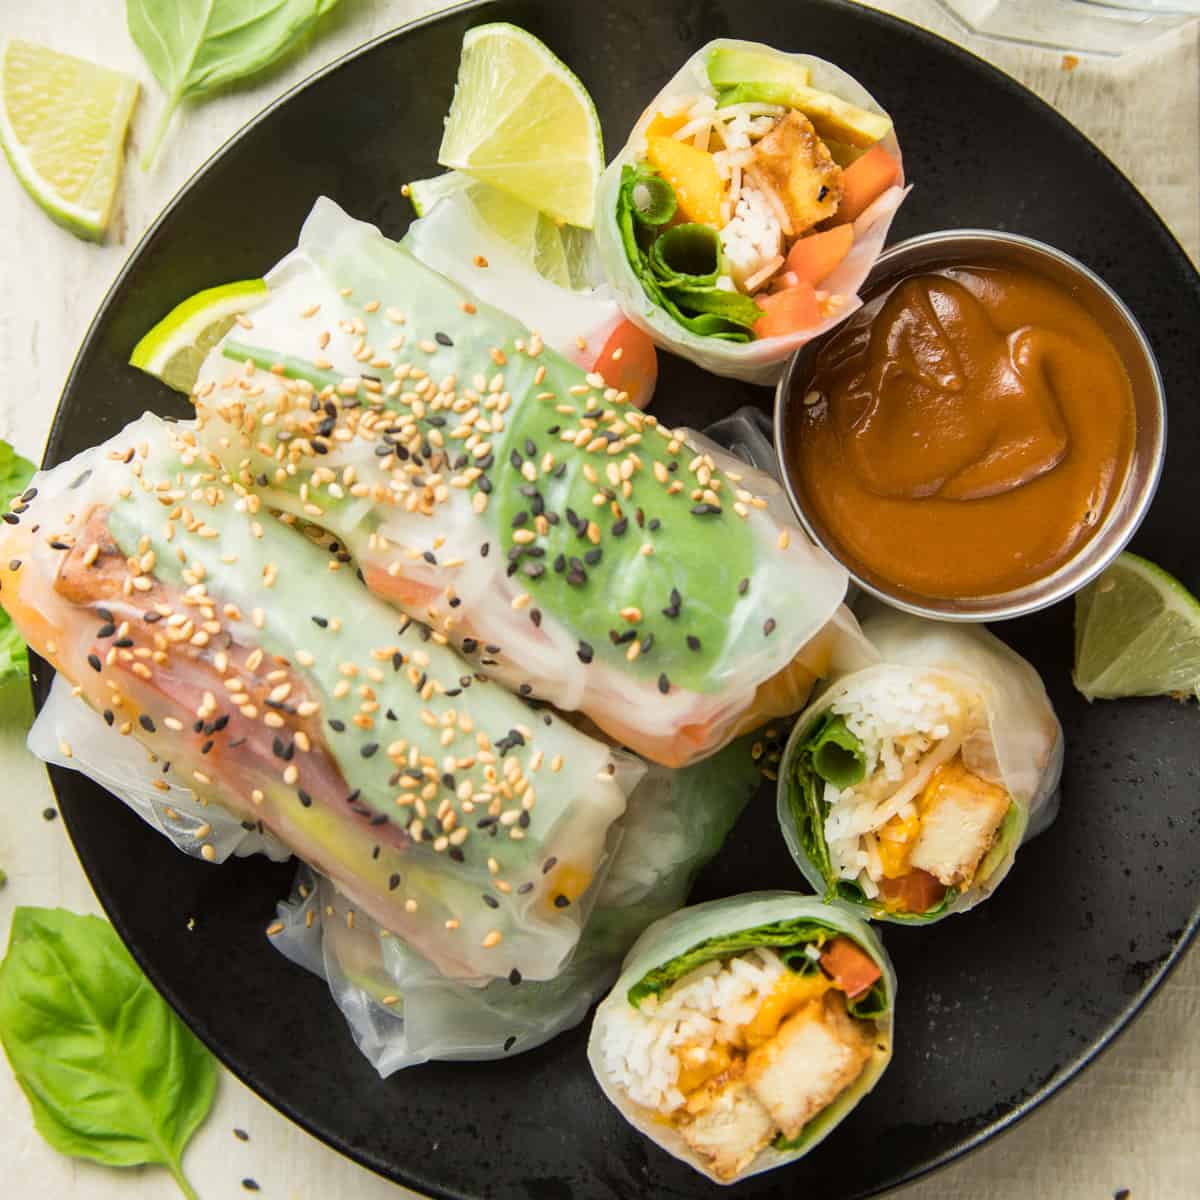 Vegan Summer Rolls Topped with Sesame Seeds and Dish of Peanut Sauce on a Plate